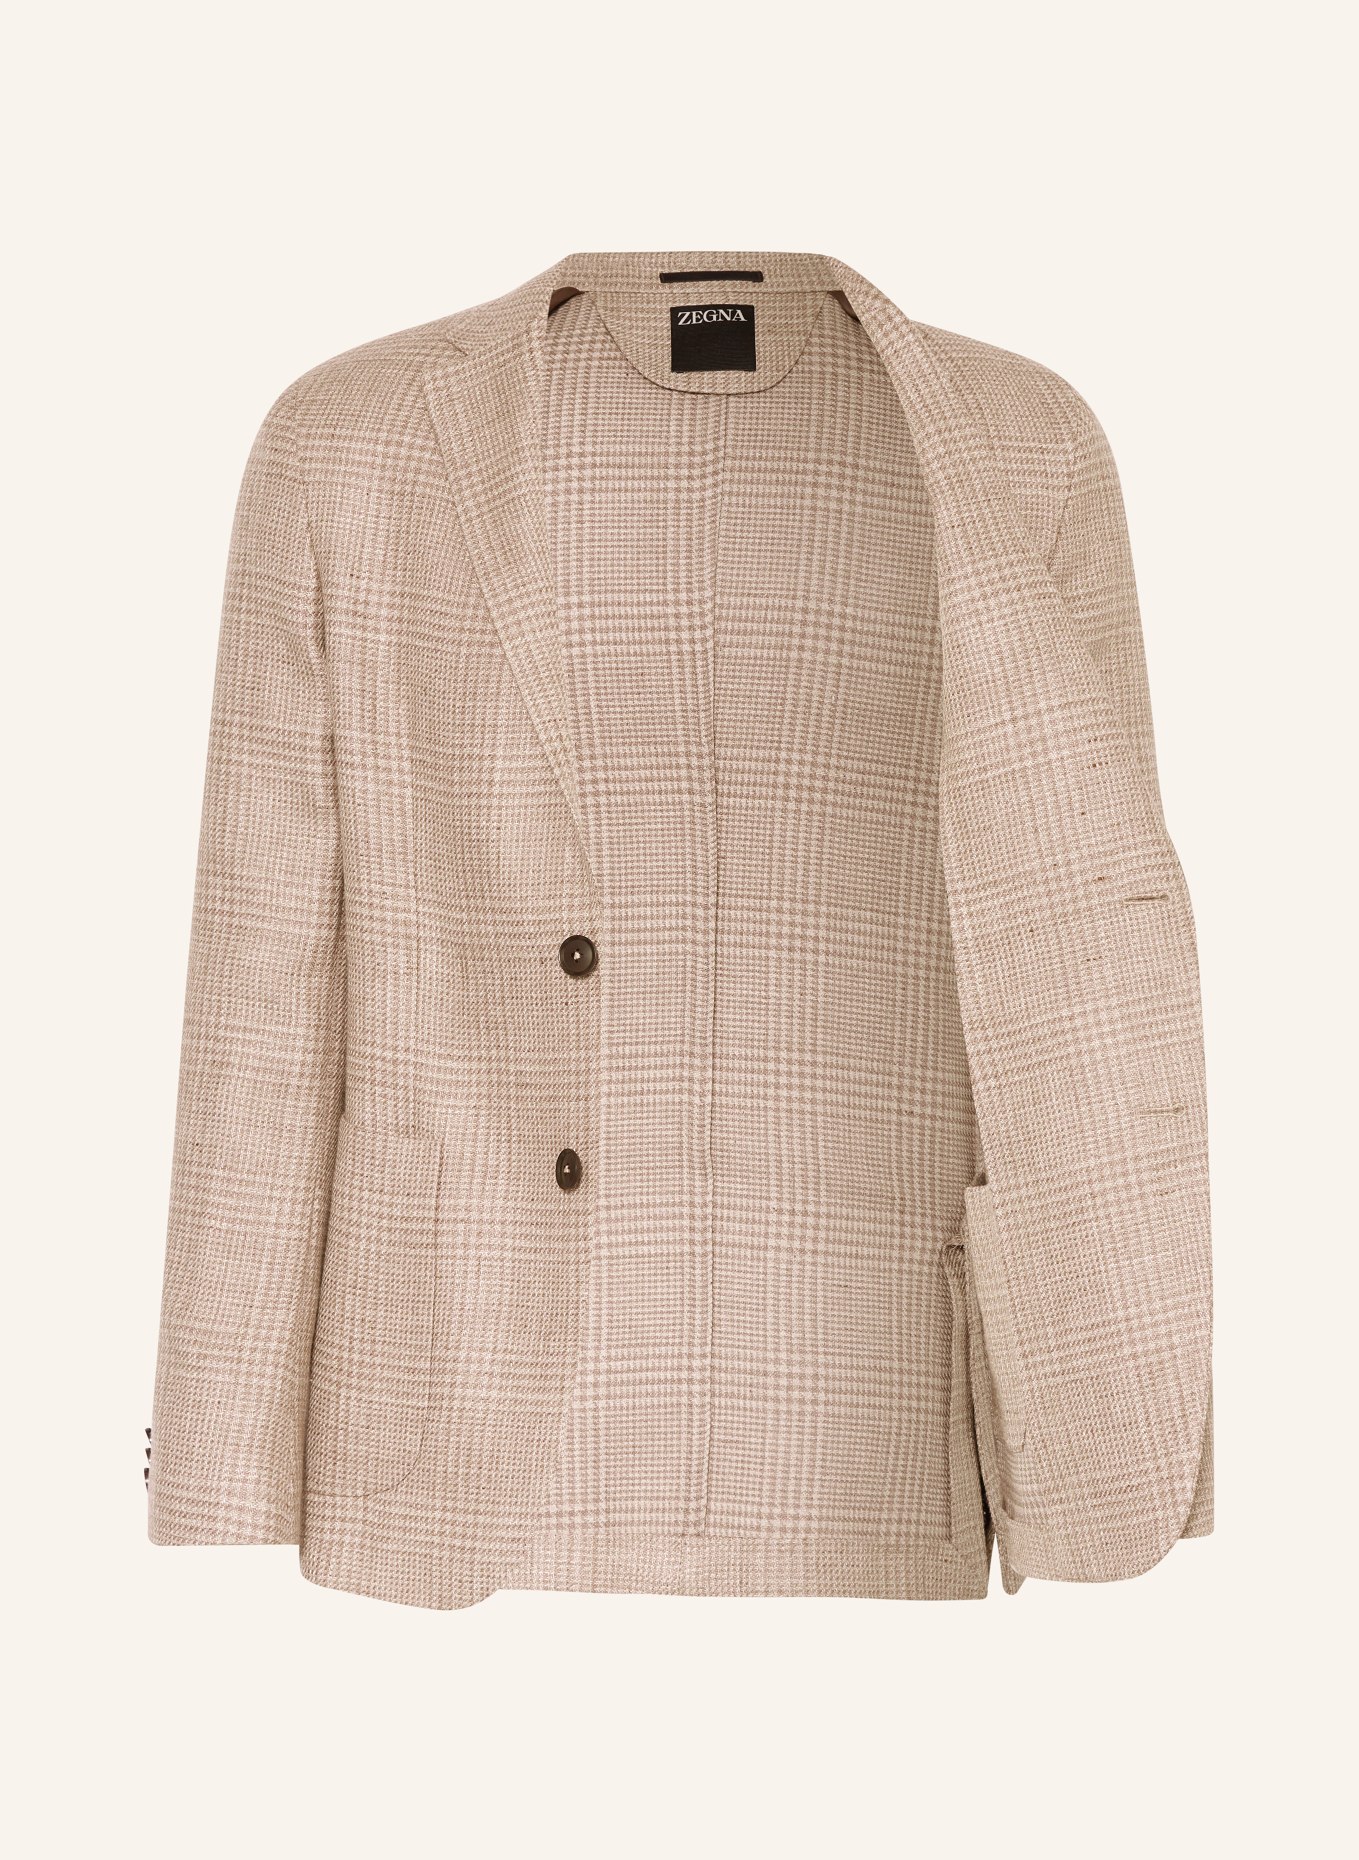 ZEGNA Tailored jacket extra slim fit with linen, Color: 7A7 Sand (Image 4)